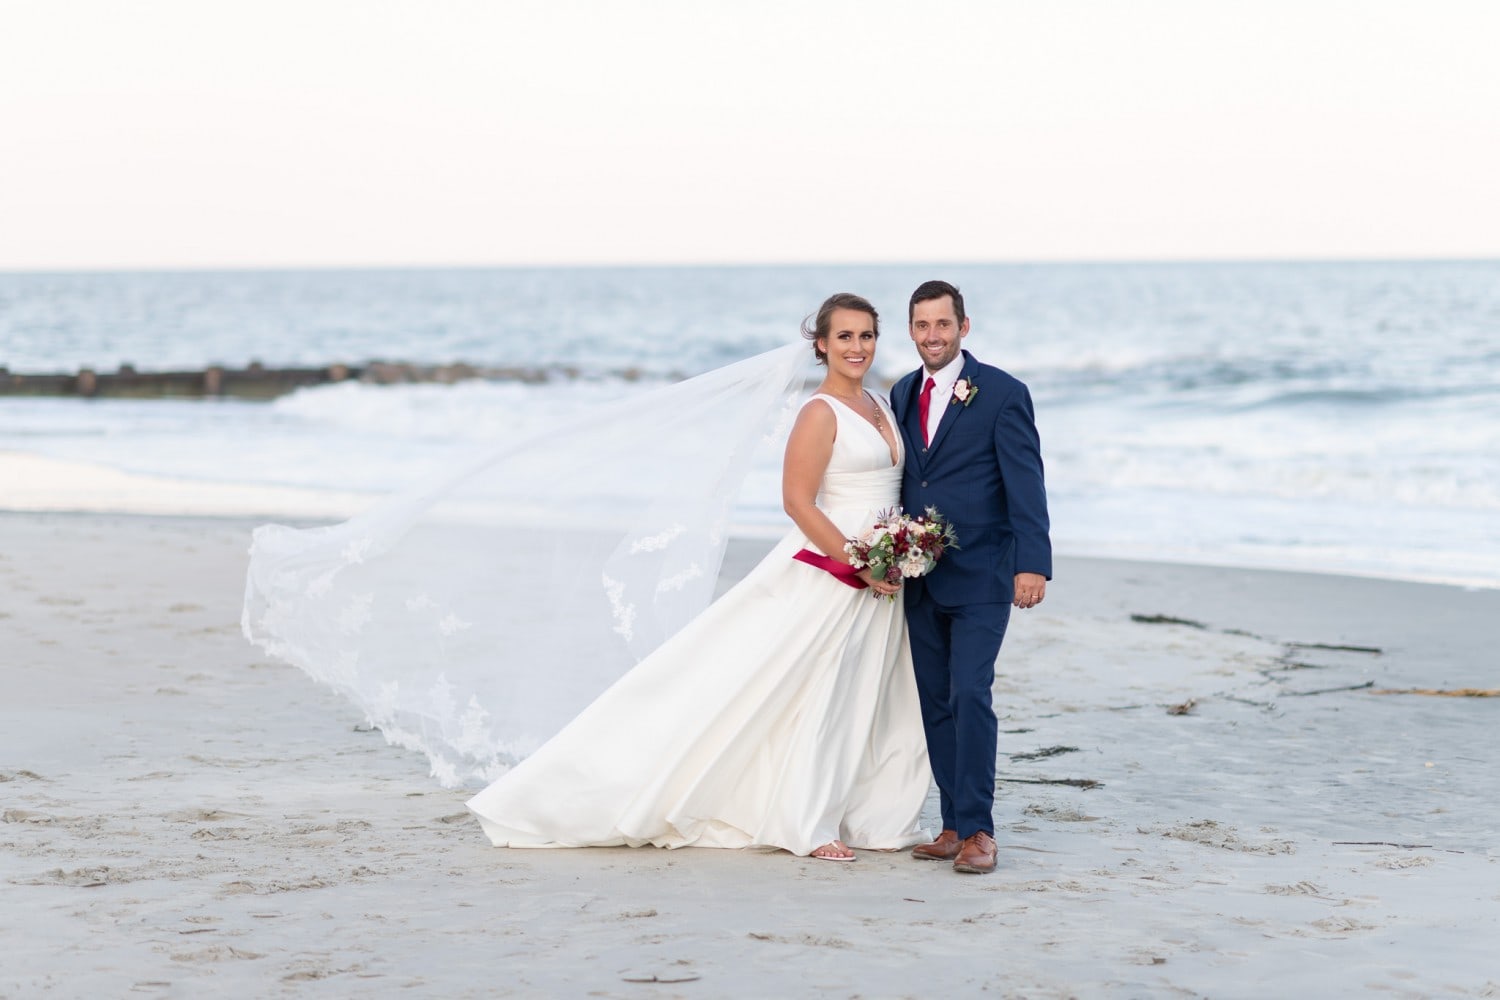 Bride and groom with her veil blowing in the wind - Pelican Inn - Pawleys Island